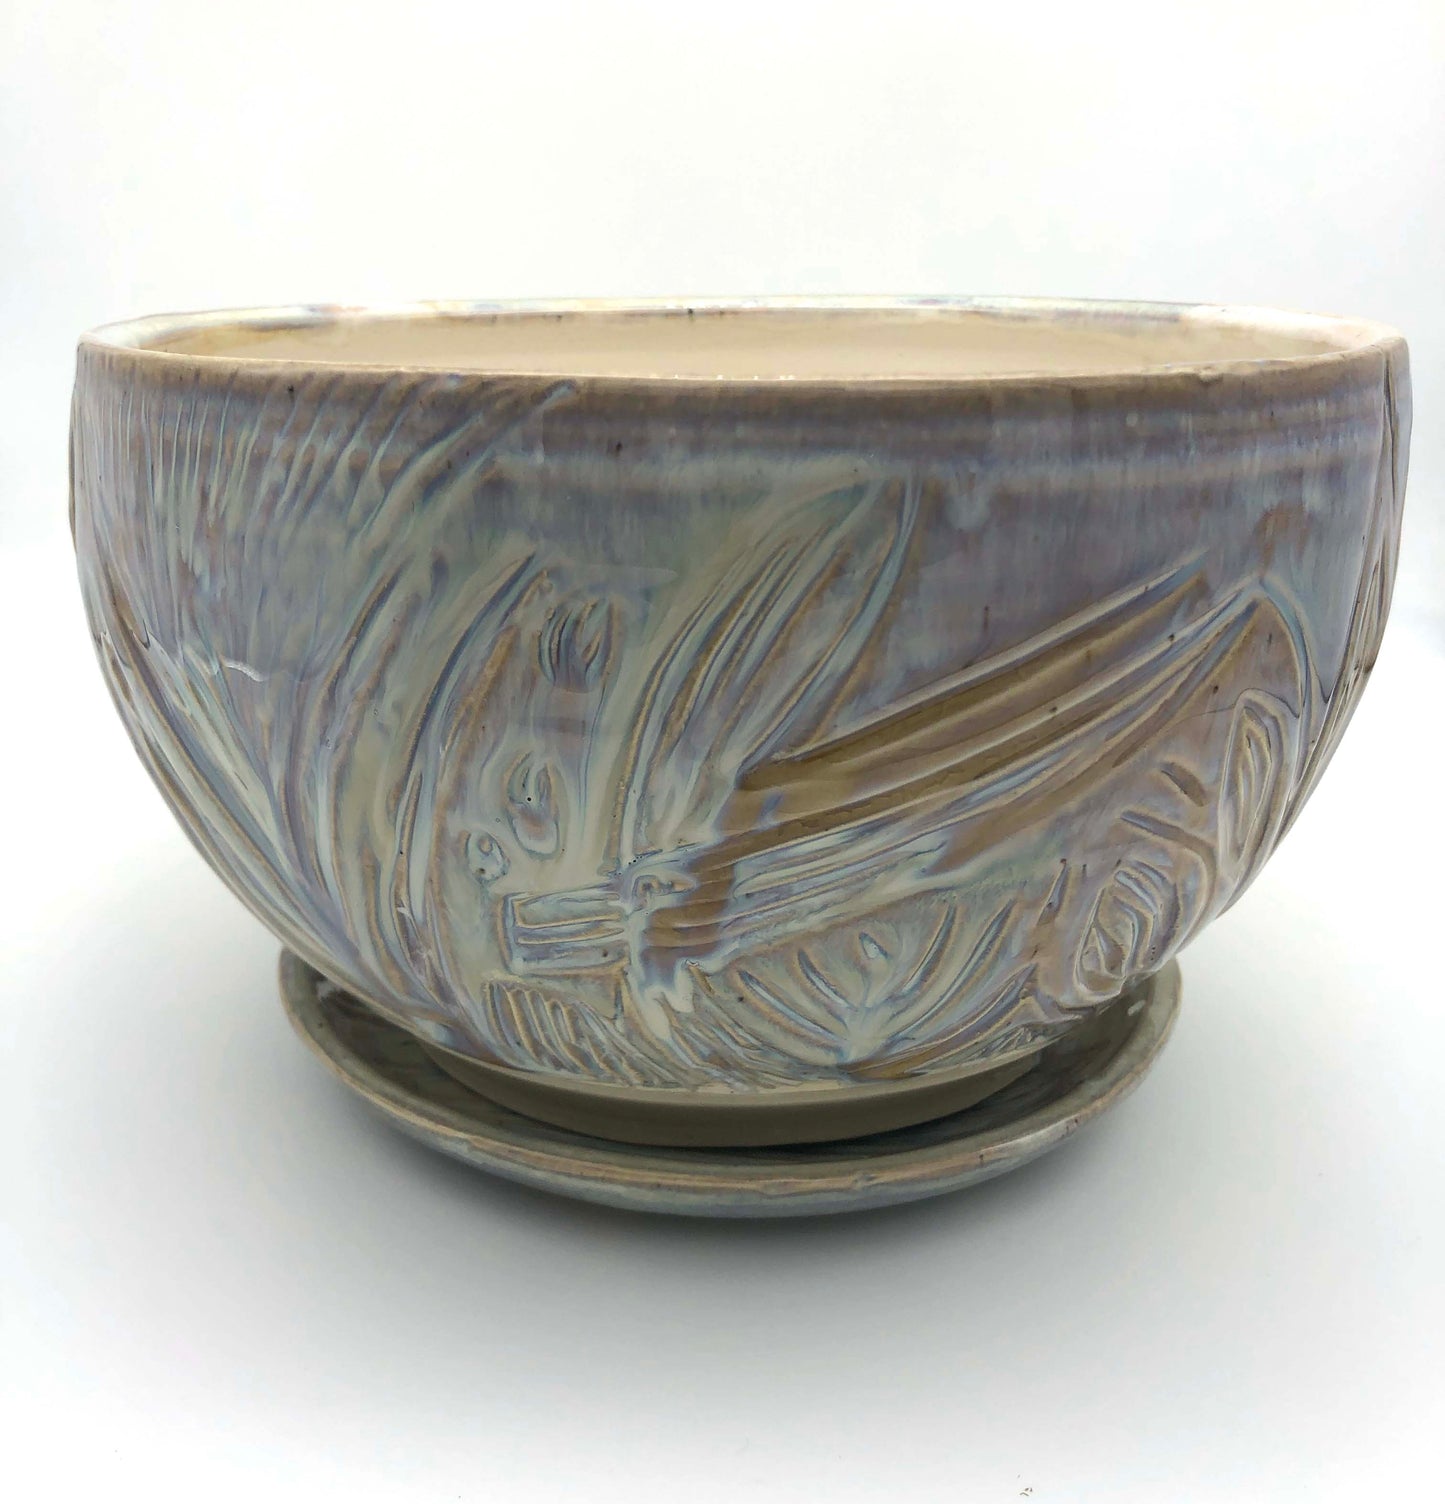 Iridescent Planter With Carvings - Large